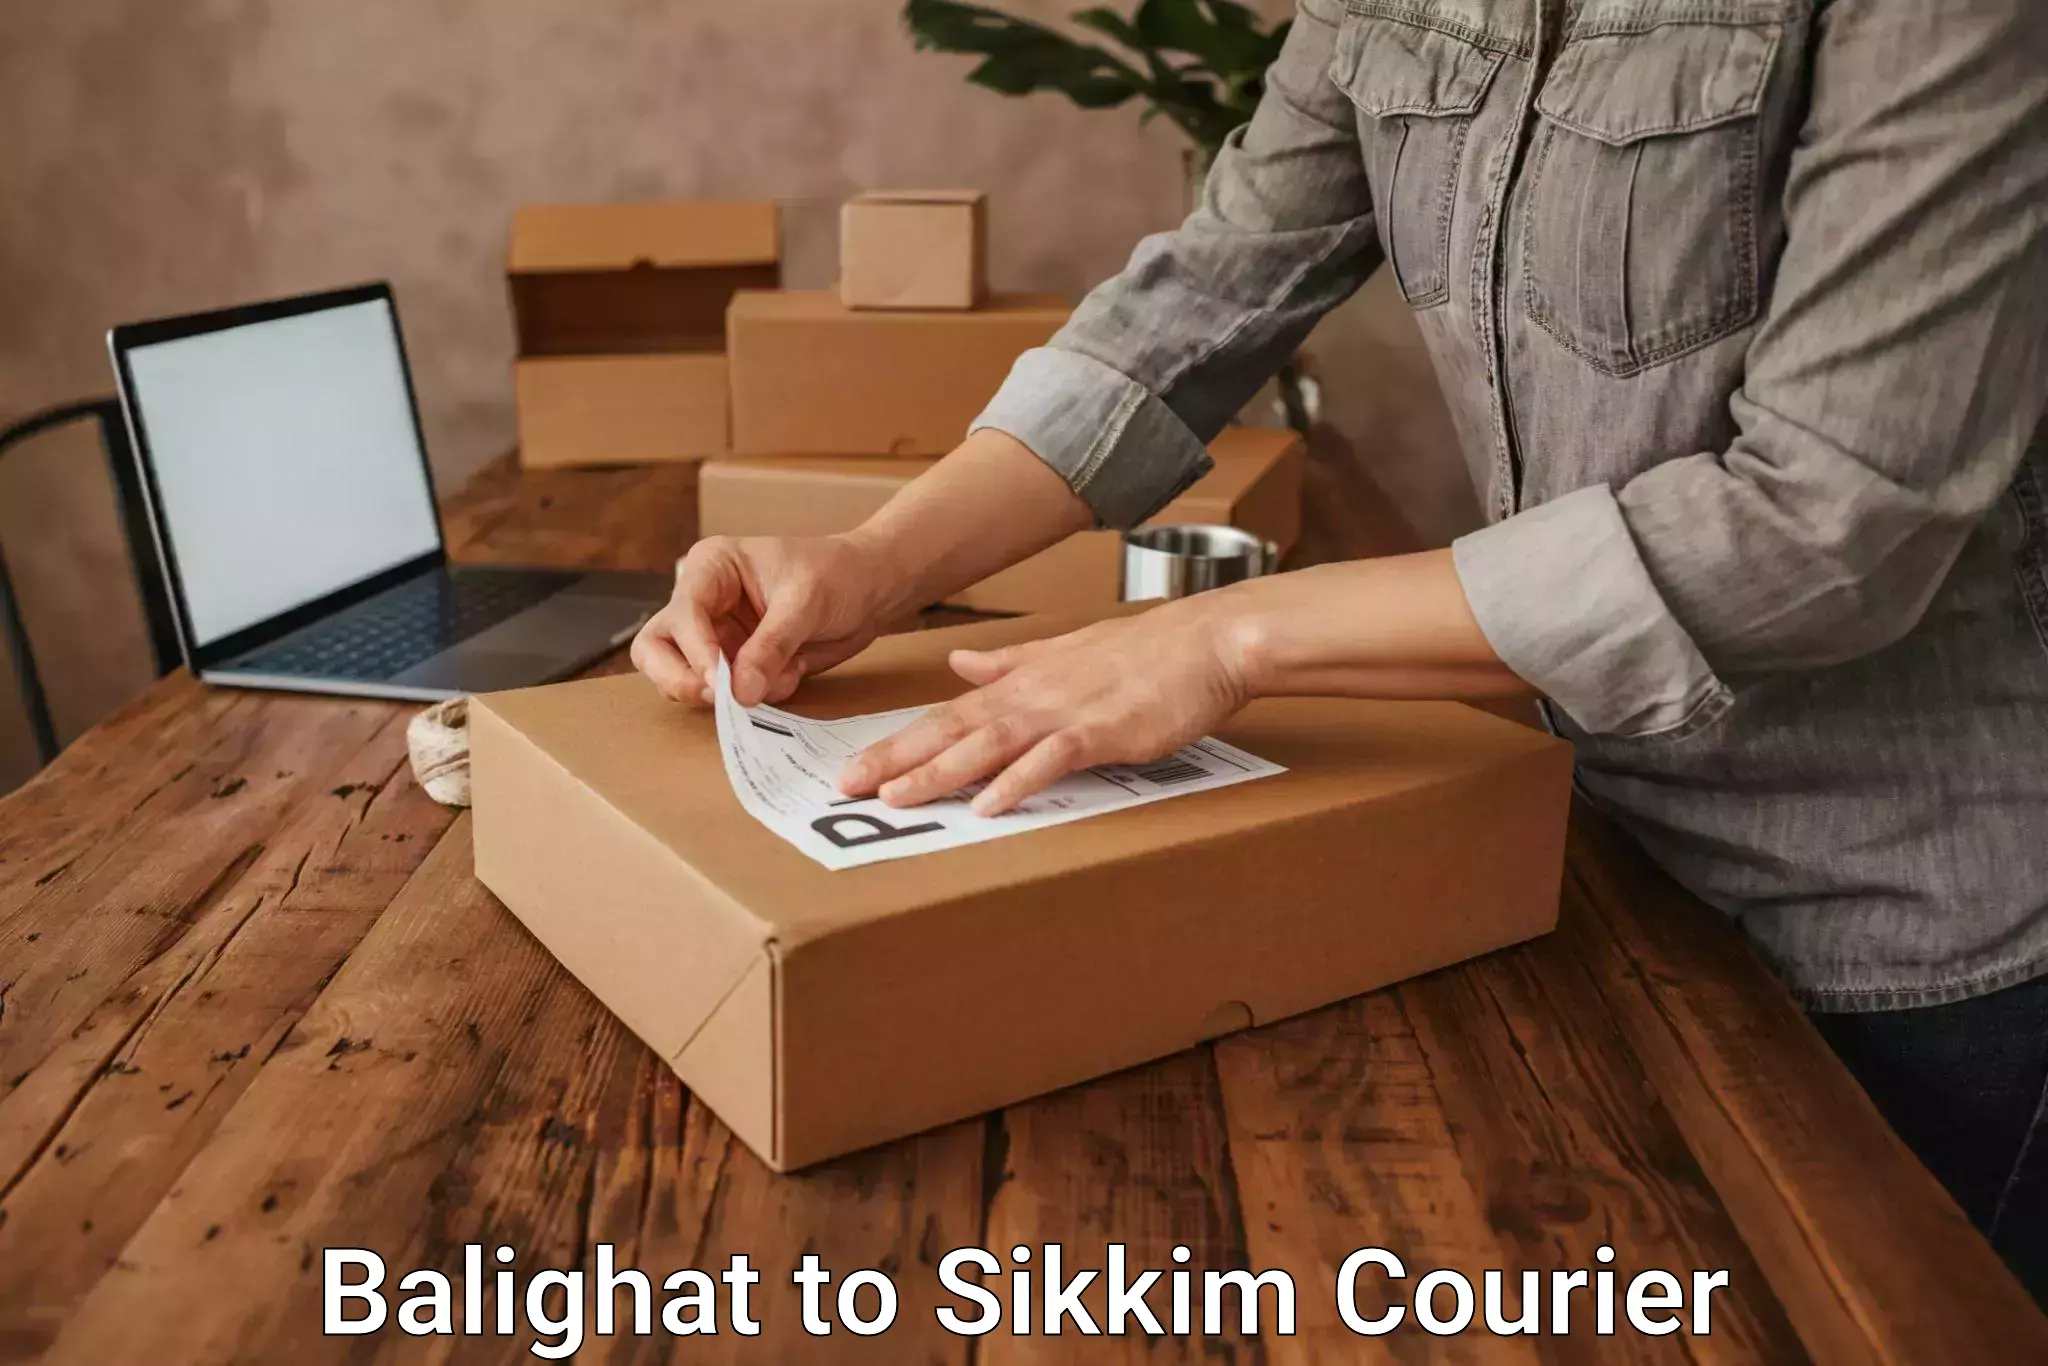 Professional courier handling Balighat to Rangpo